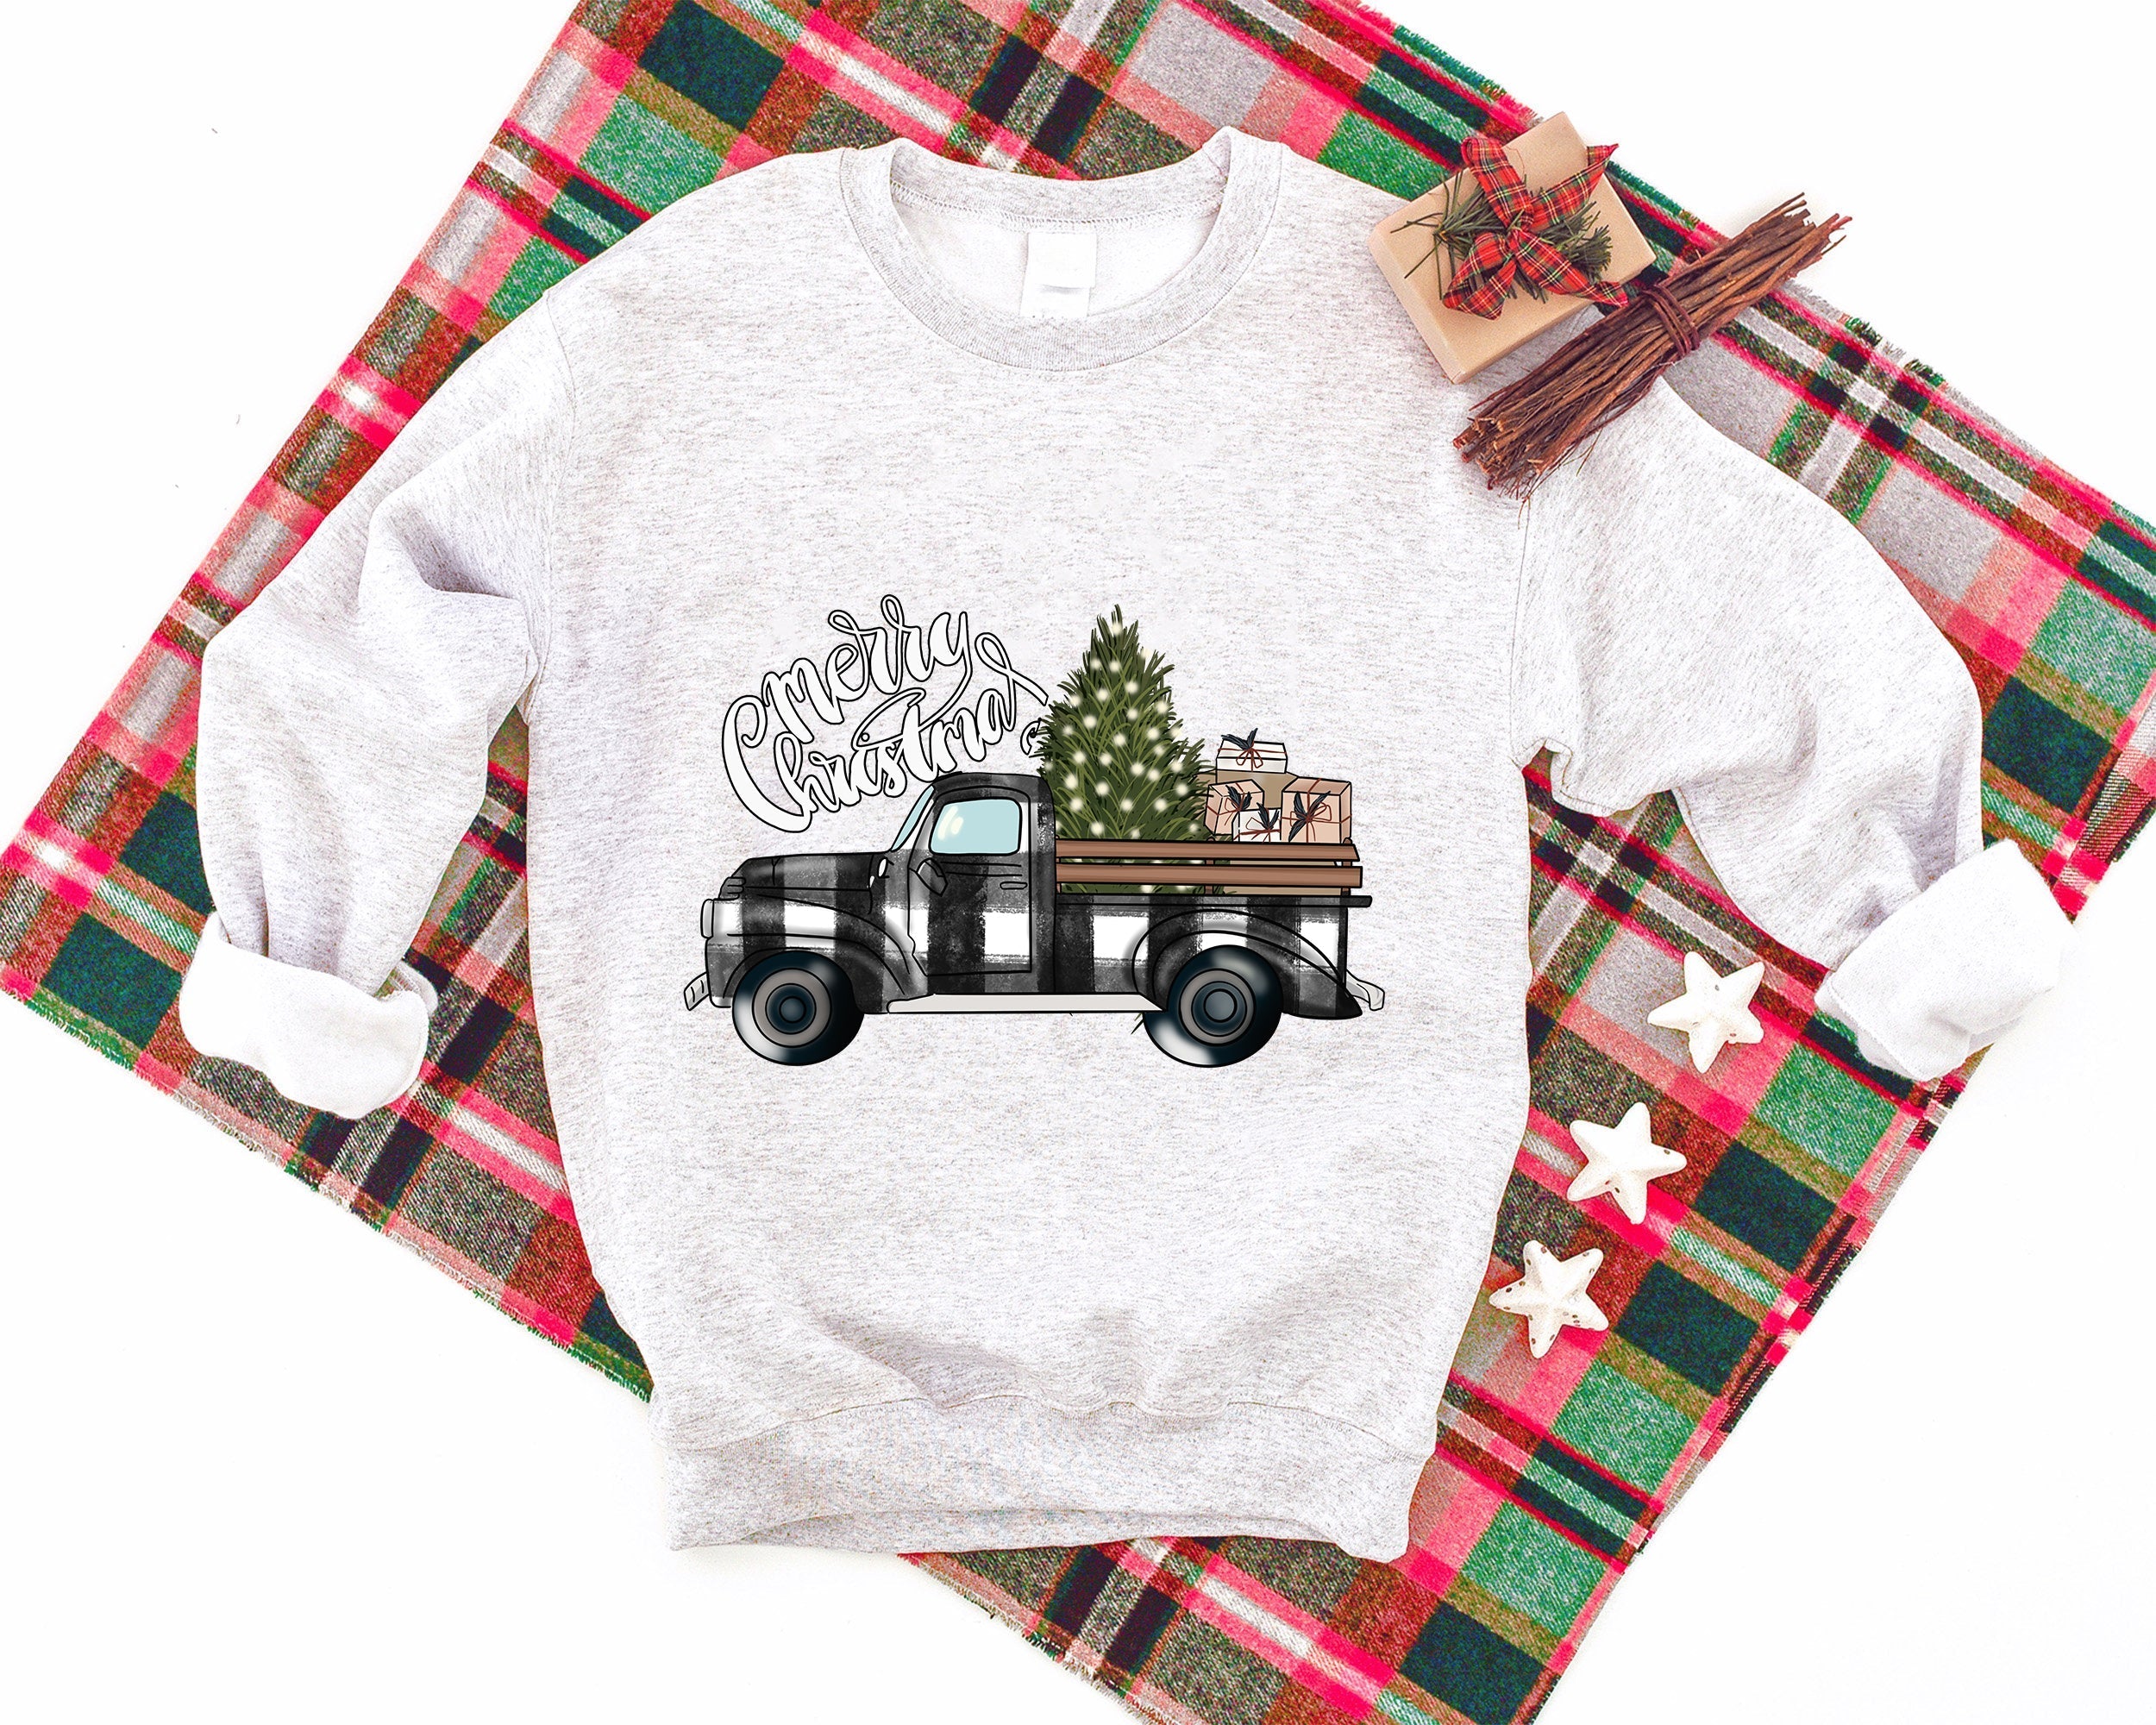 'Merry Chirstmas' Letter and ' A Car Of Gift' Pattern Family Christmas Matching Pajamas Tops Cute Light-gray Long Sleeve Sweatshirts With Dog Bandana